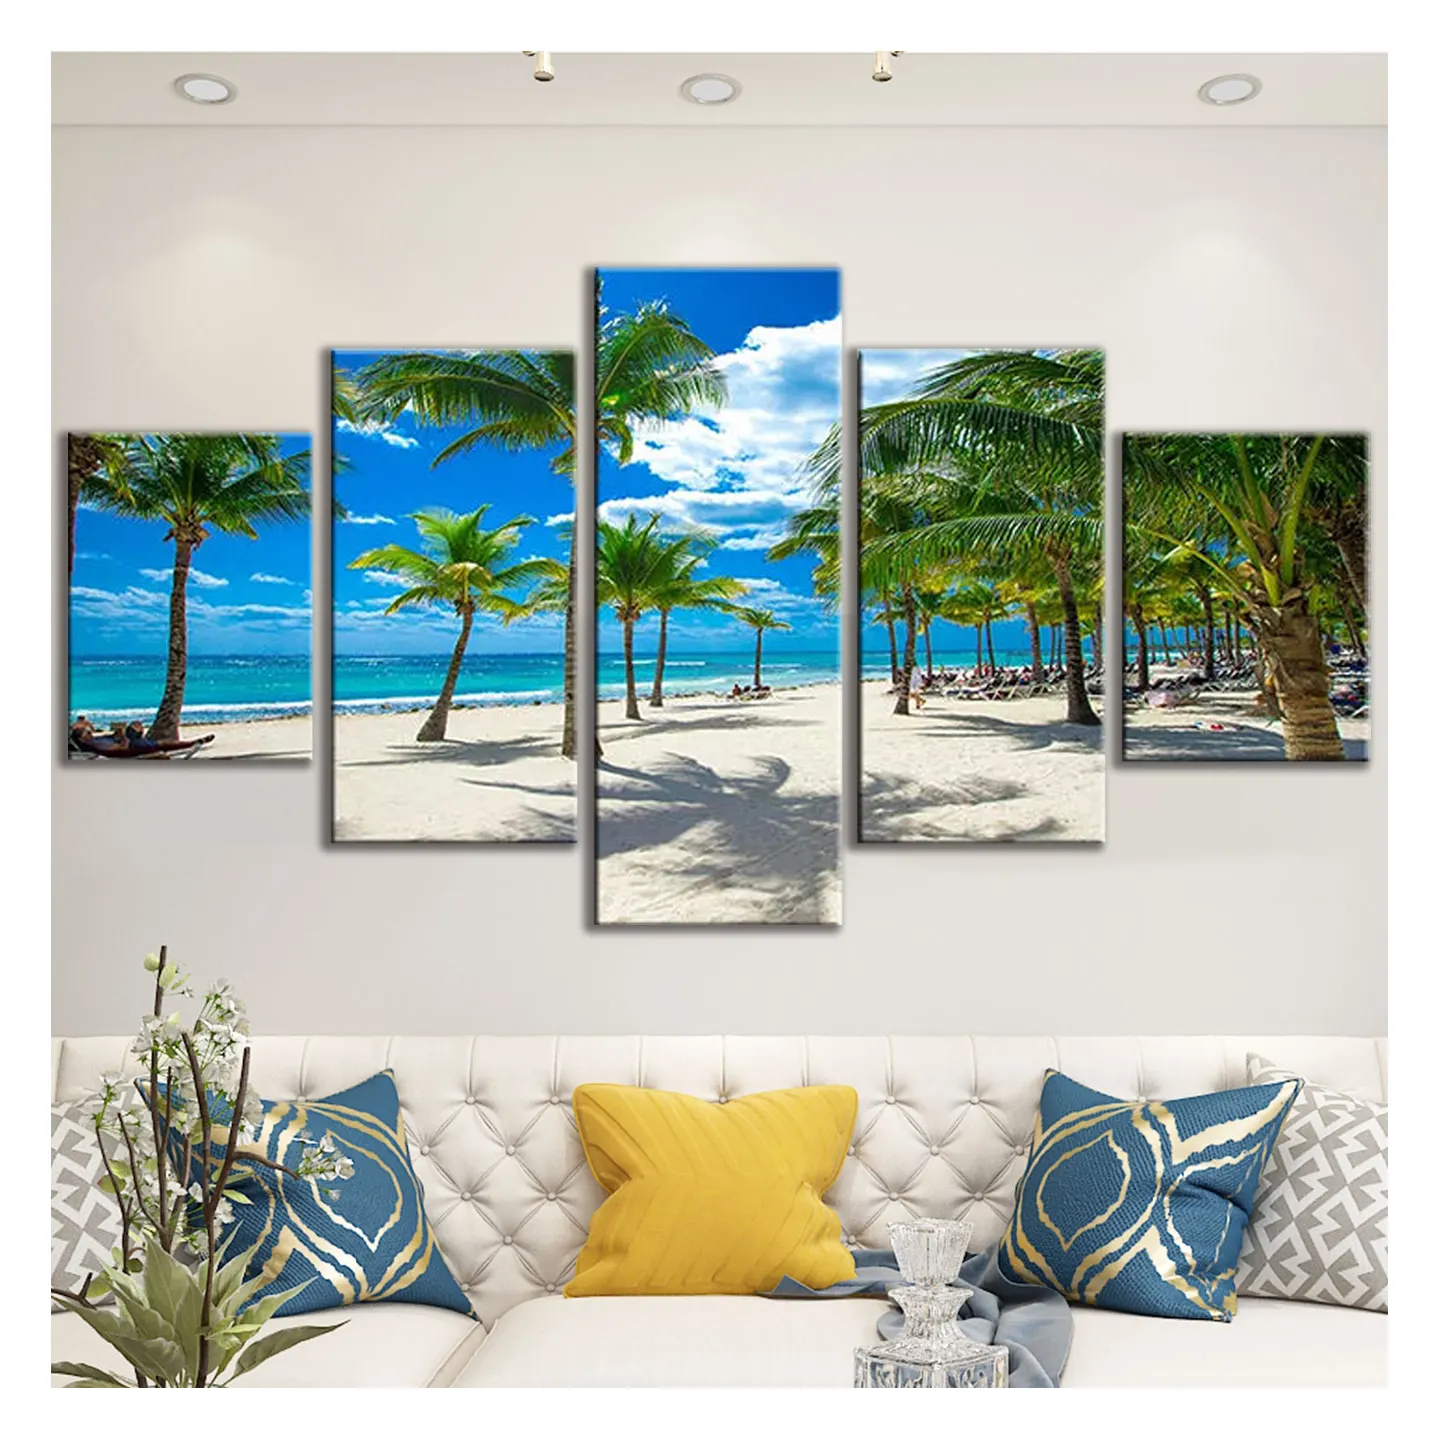 5 Panel Canvas Printing Seascape Art/customized Digital Photography Printingcheap Canvas Painting For Home Decoration